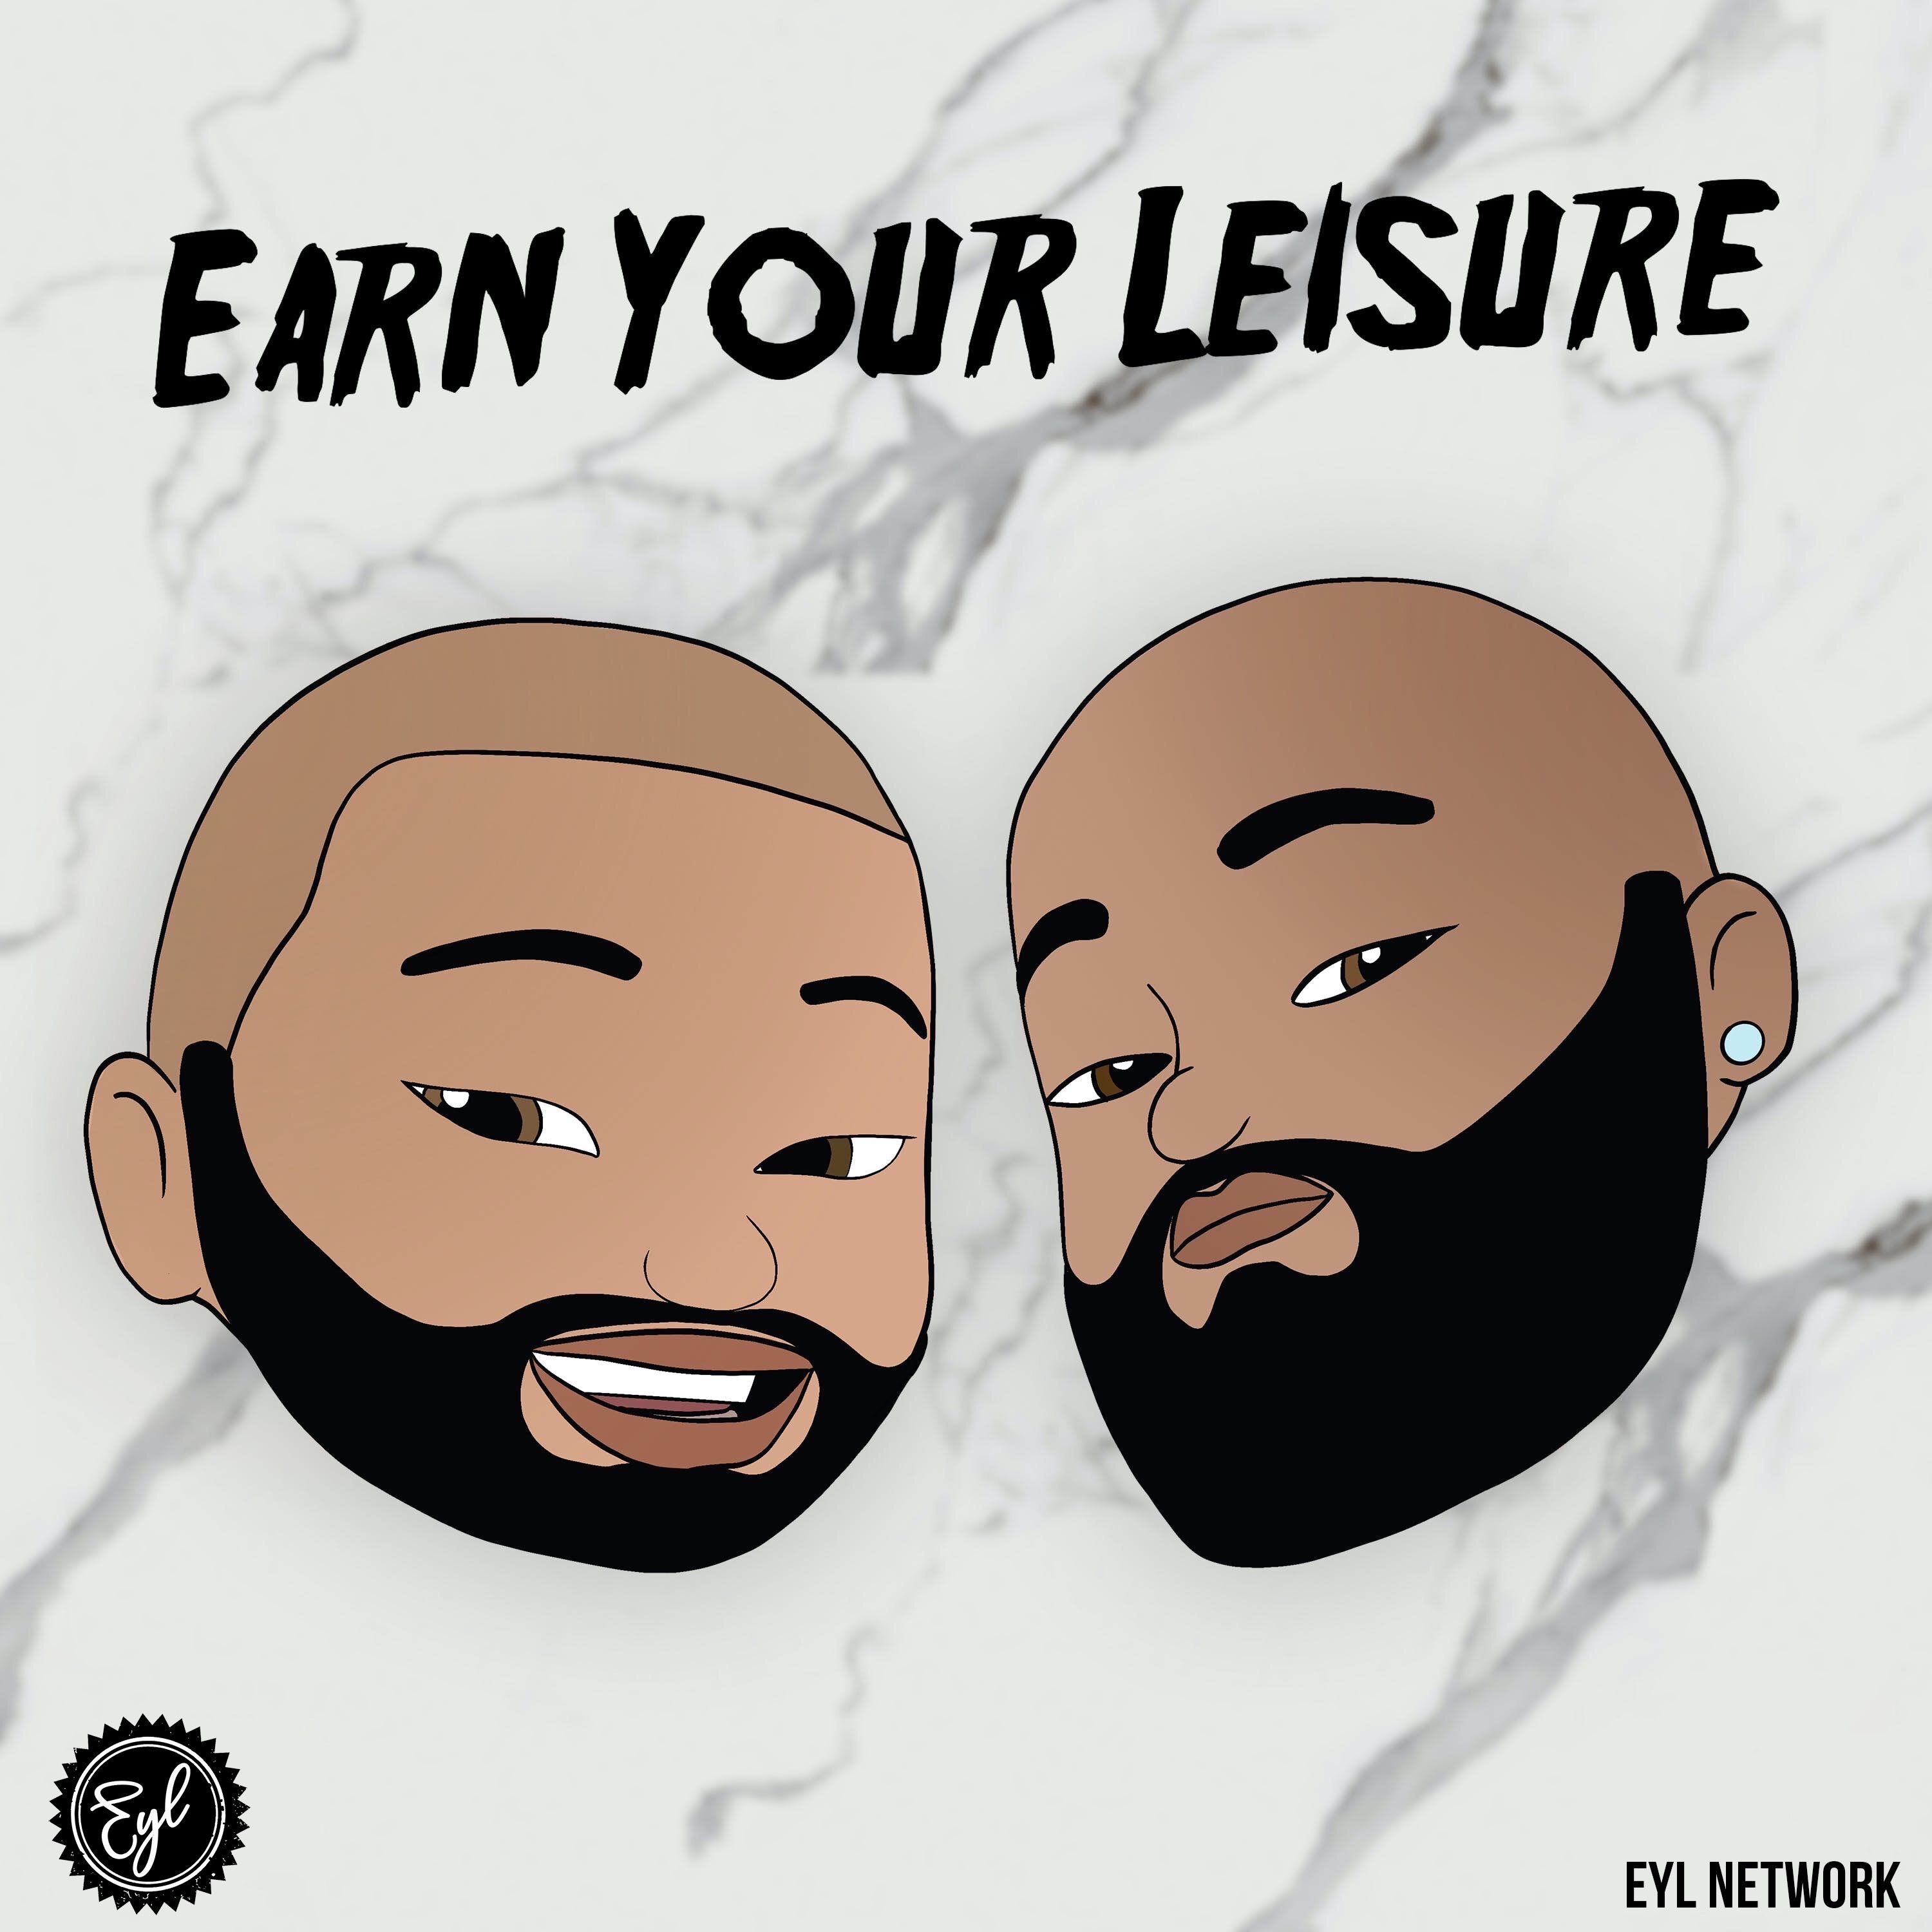 Earn Your Leisure:EYL Network